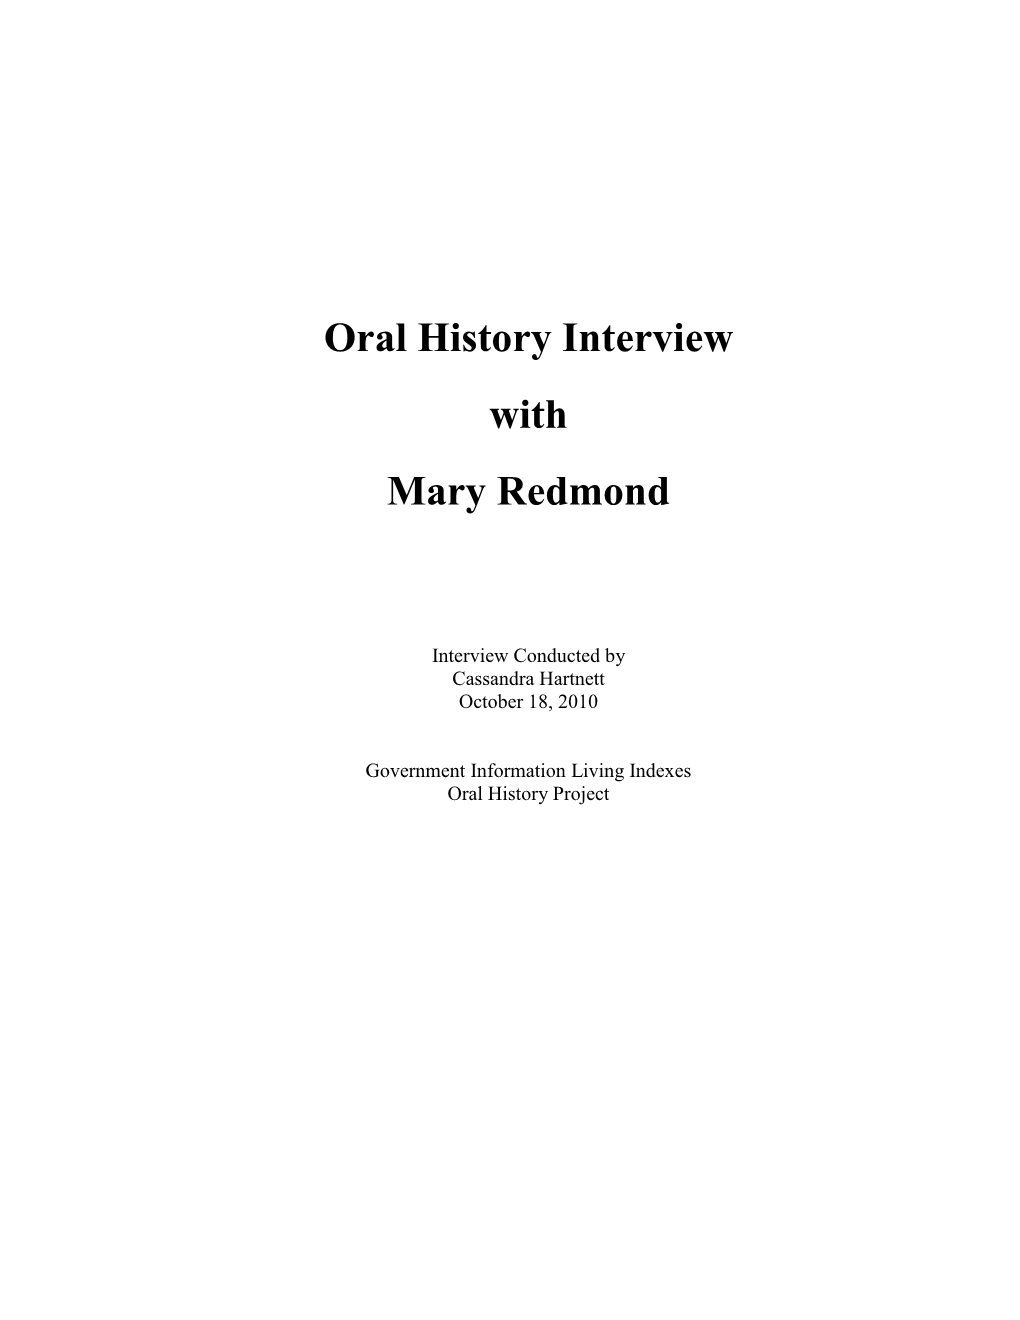 Oral History Interview with Mary Redmond